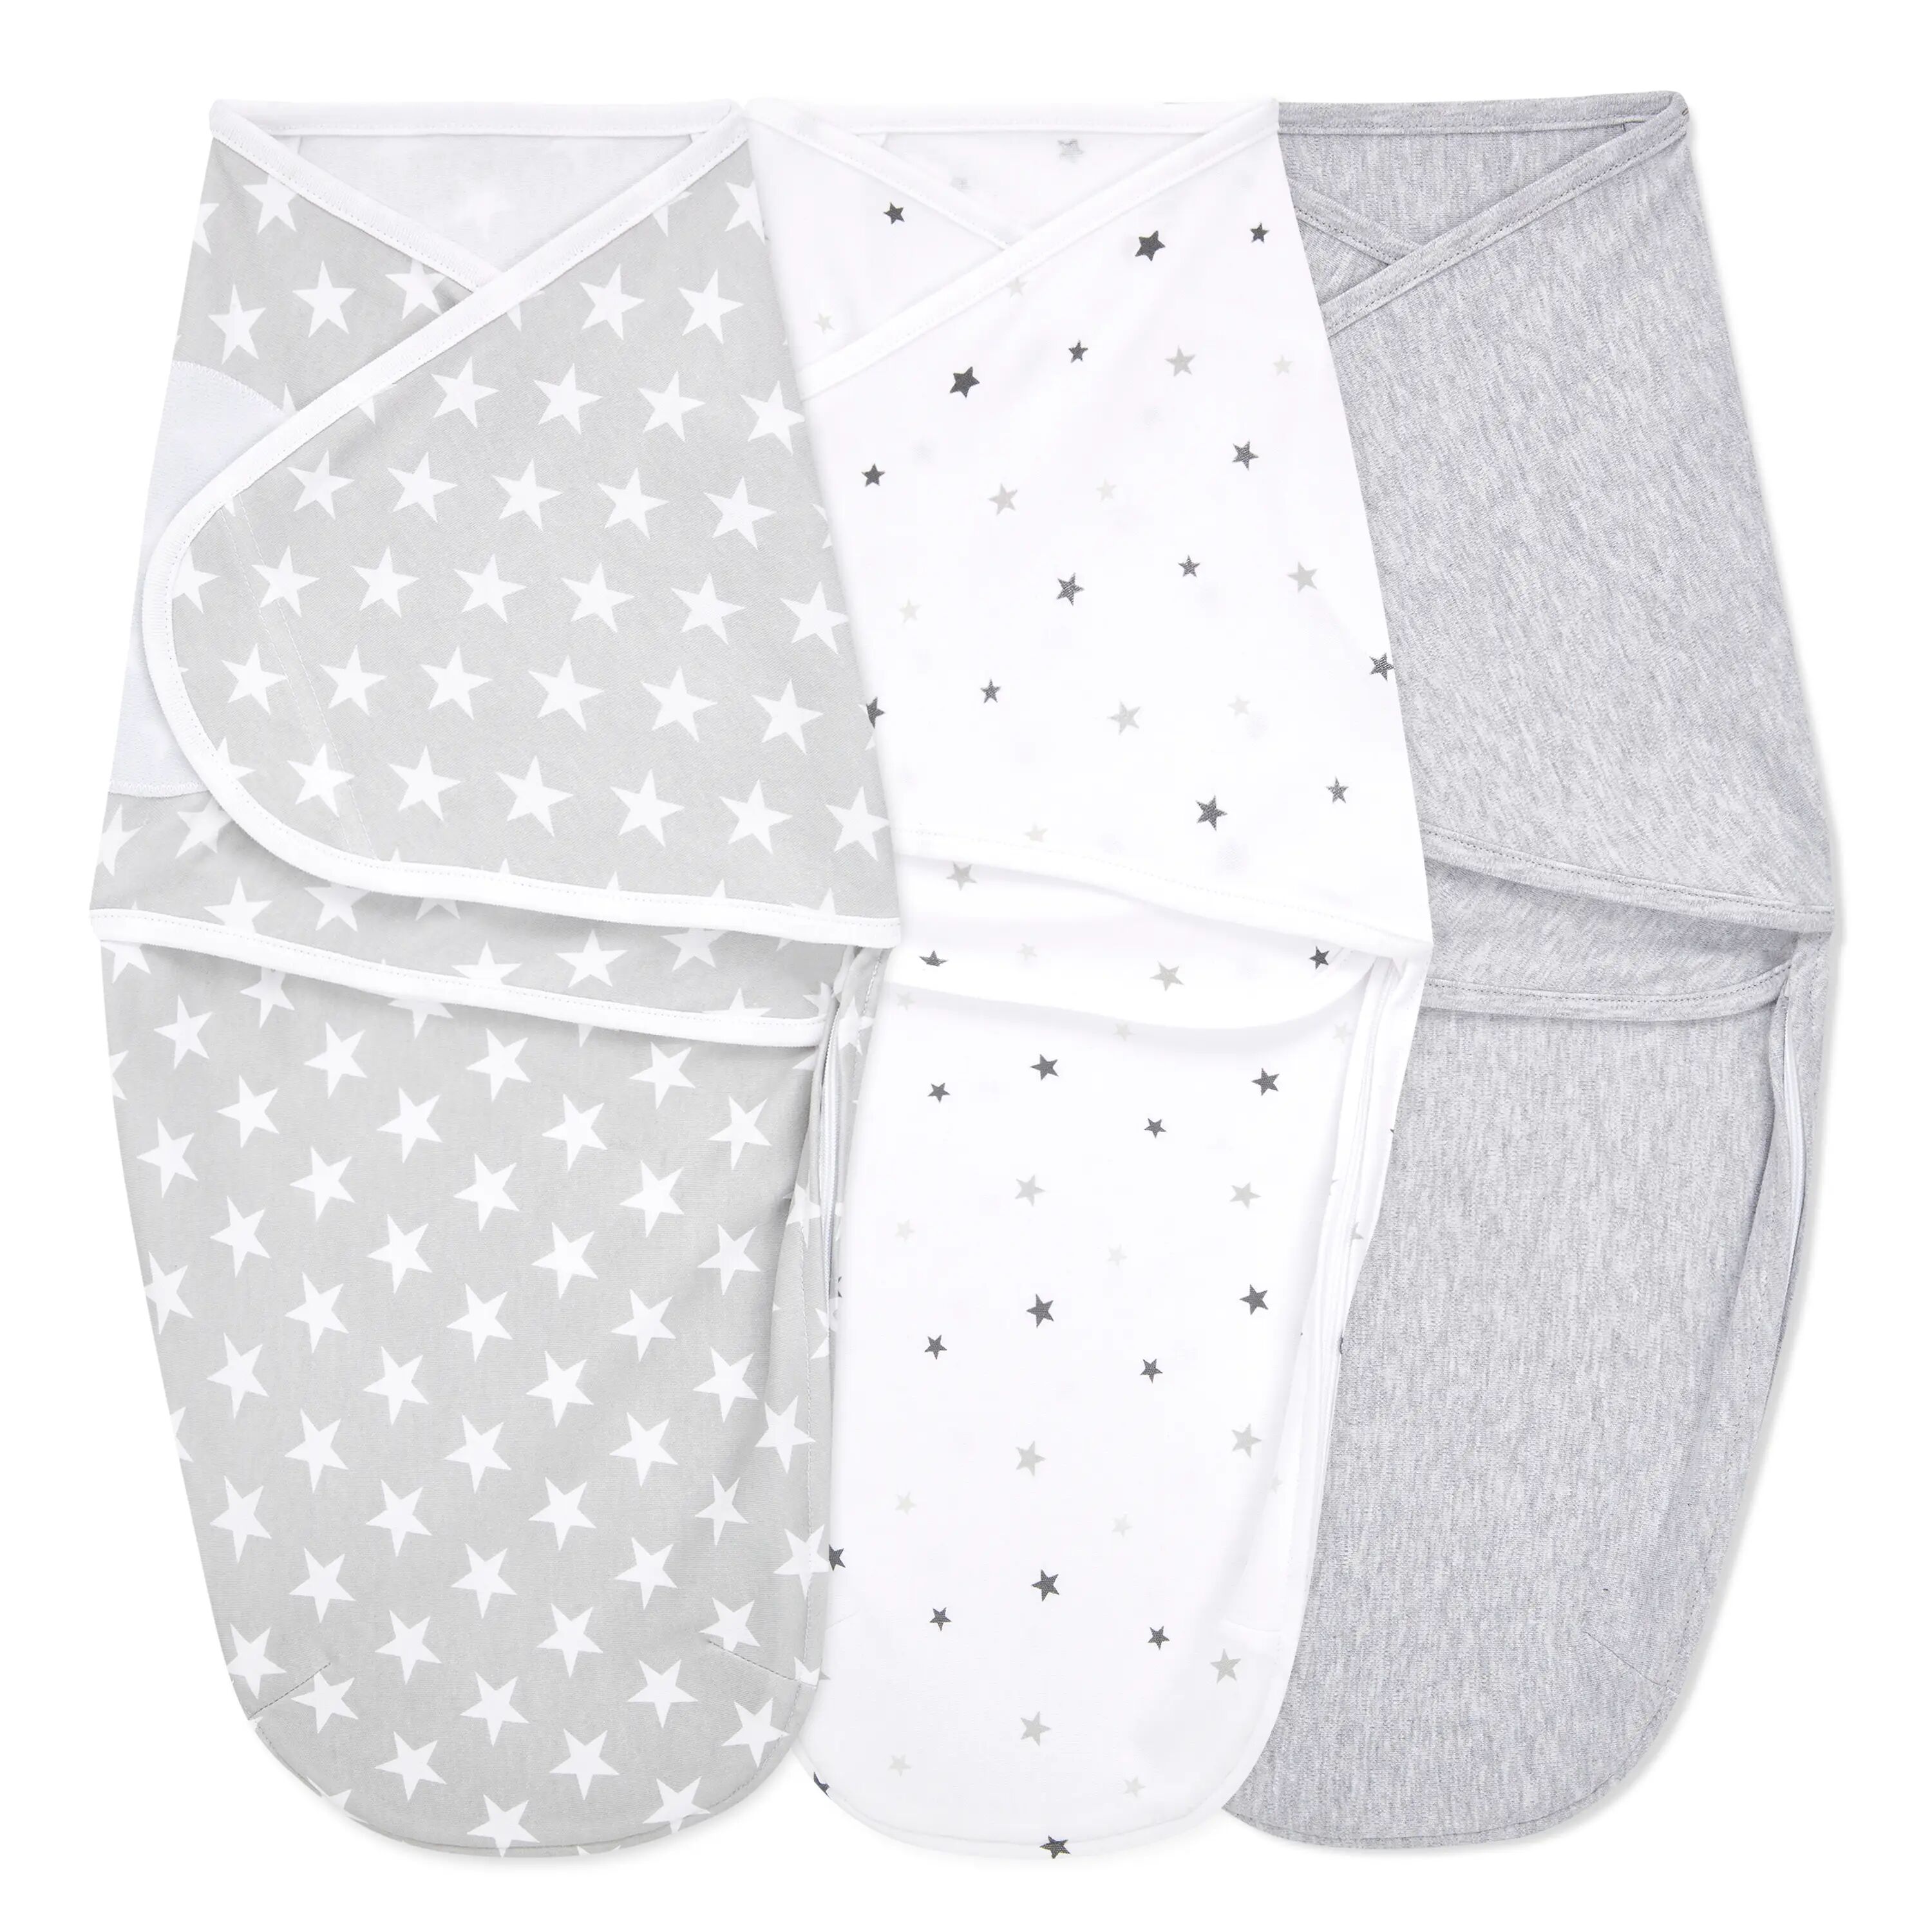 aden + anais essentials wrap swaddles 3 pack twinkle unisex 0-3 months